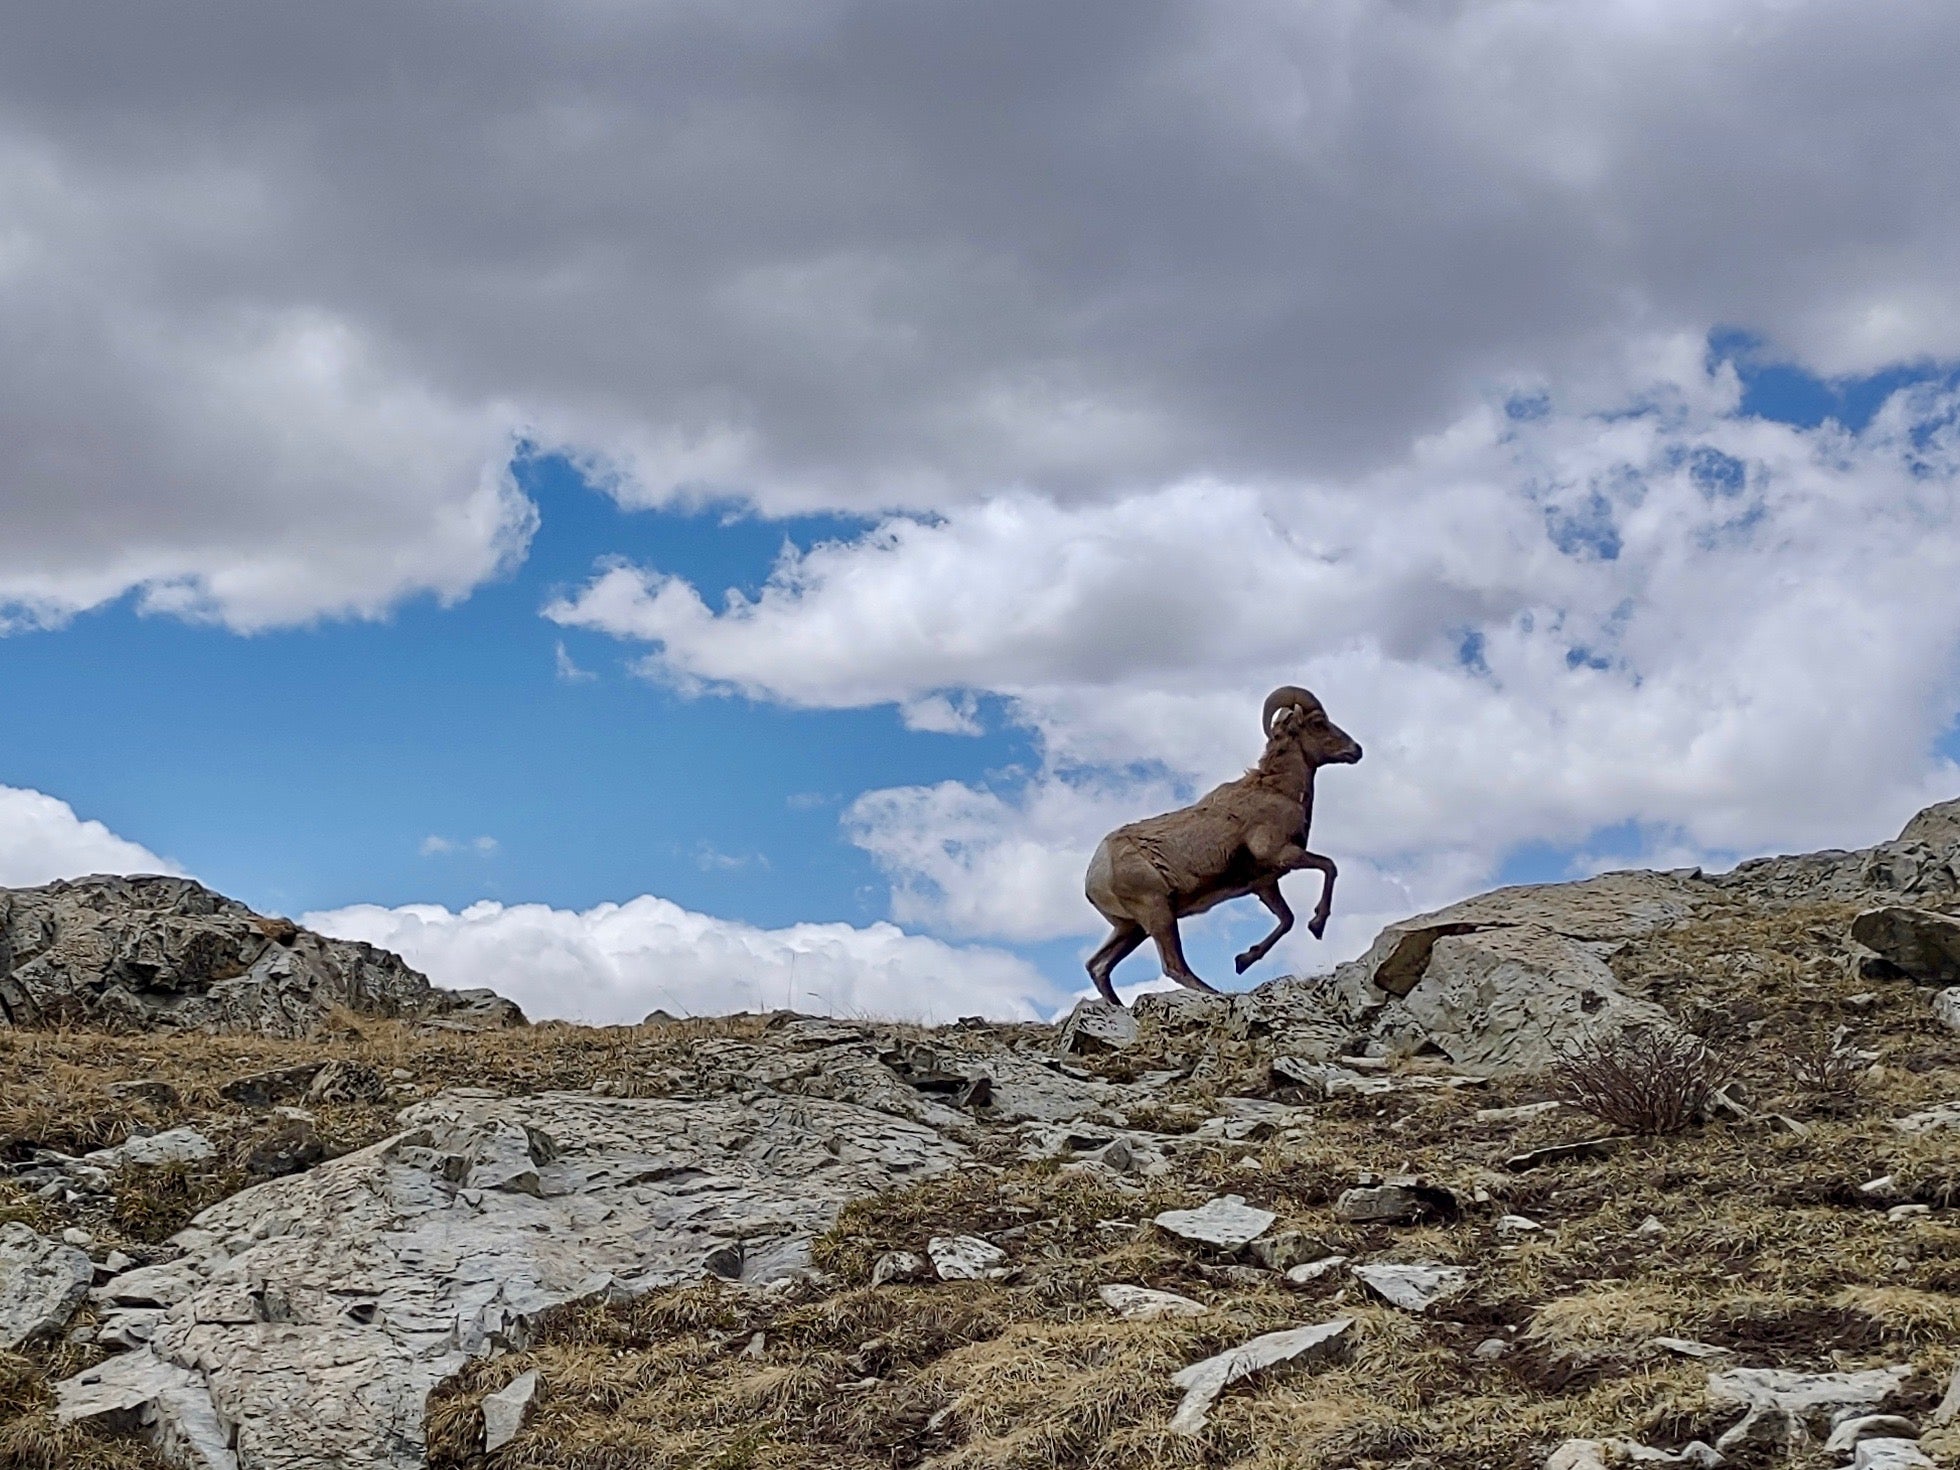 A bighorn sheet prancing on top of a rocky mountain